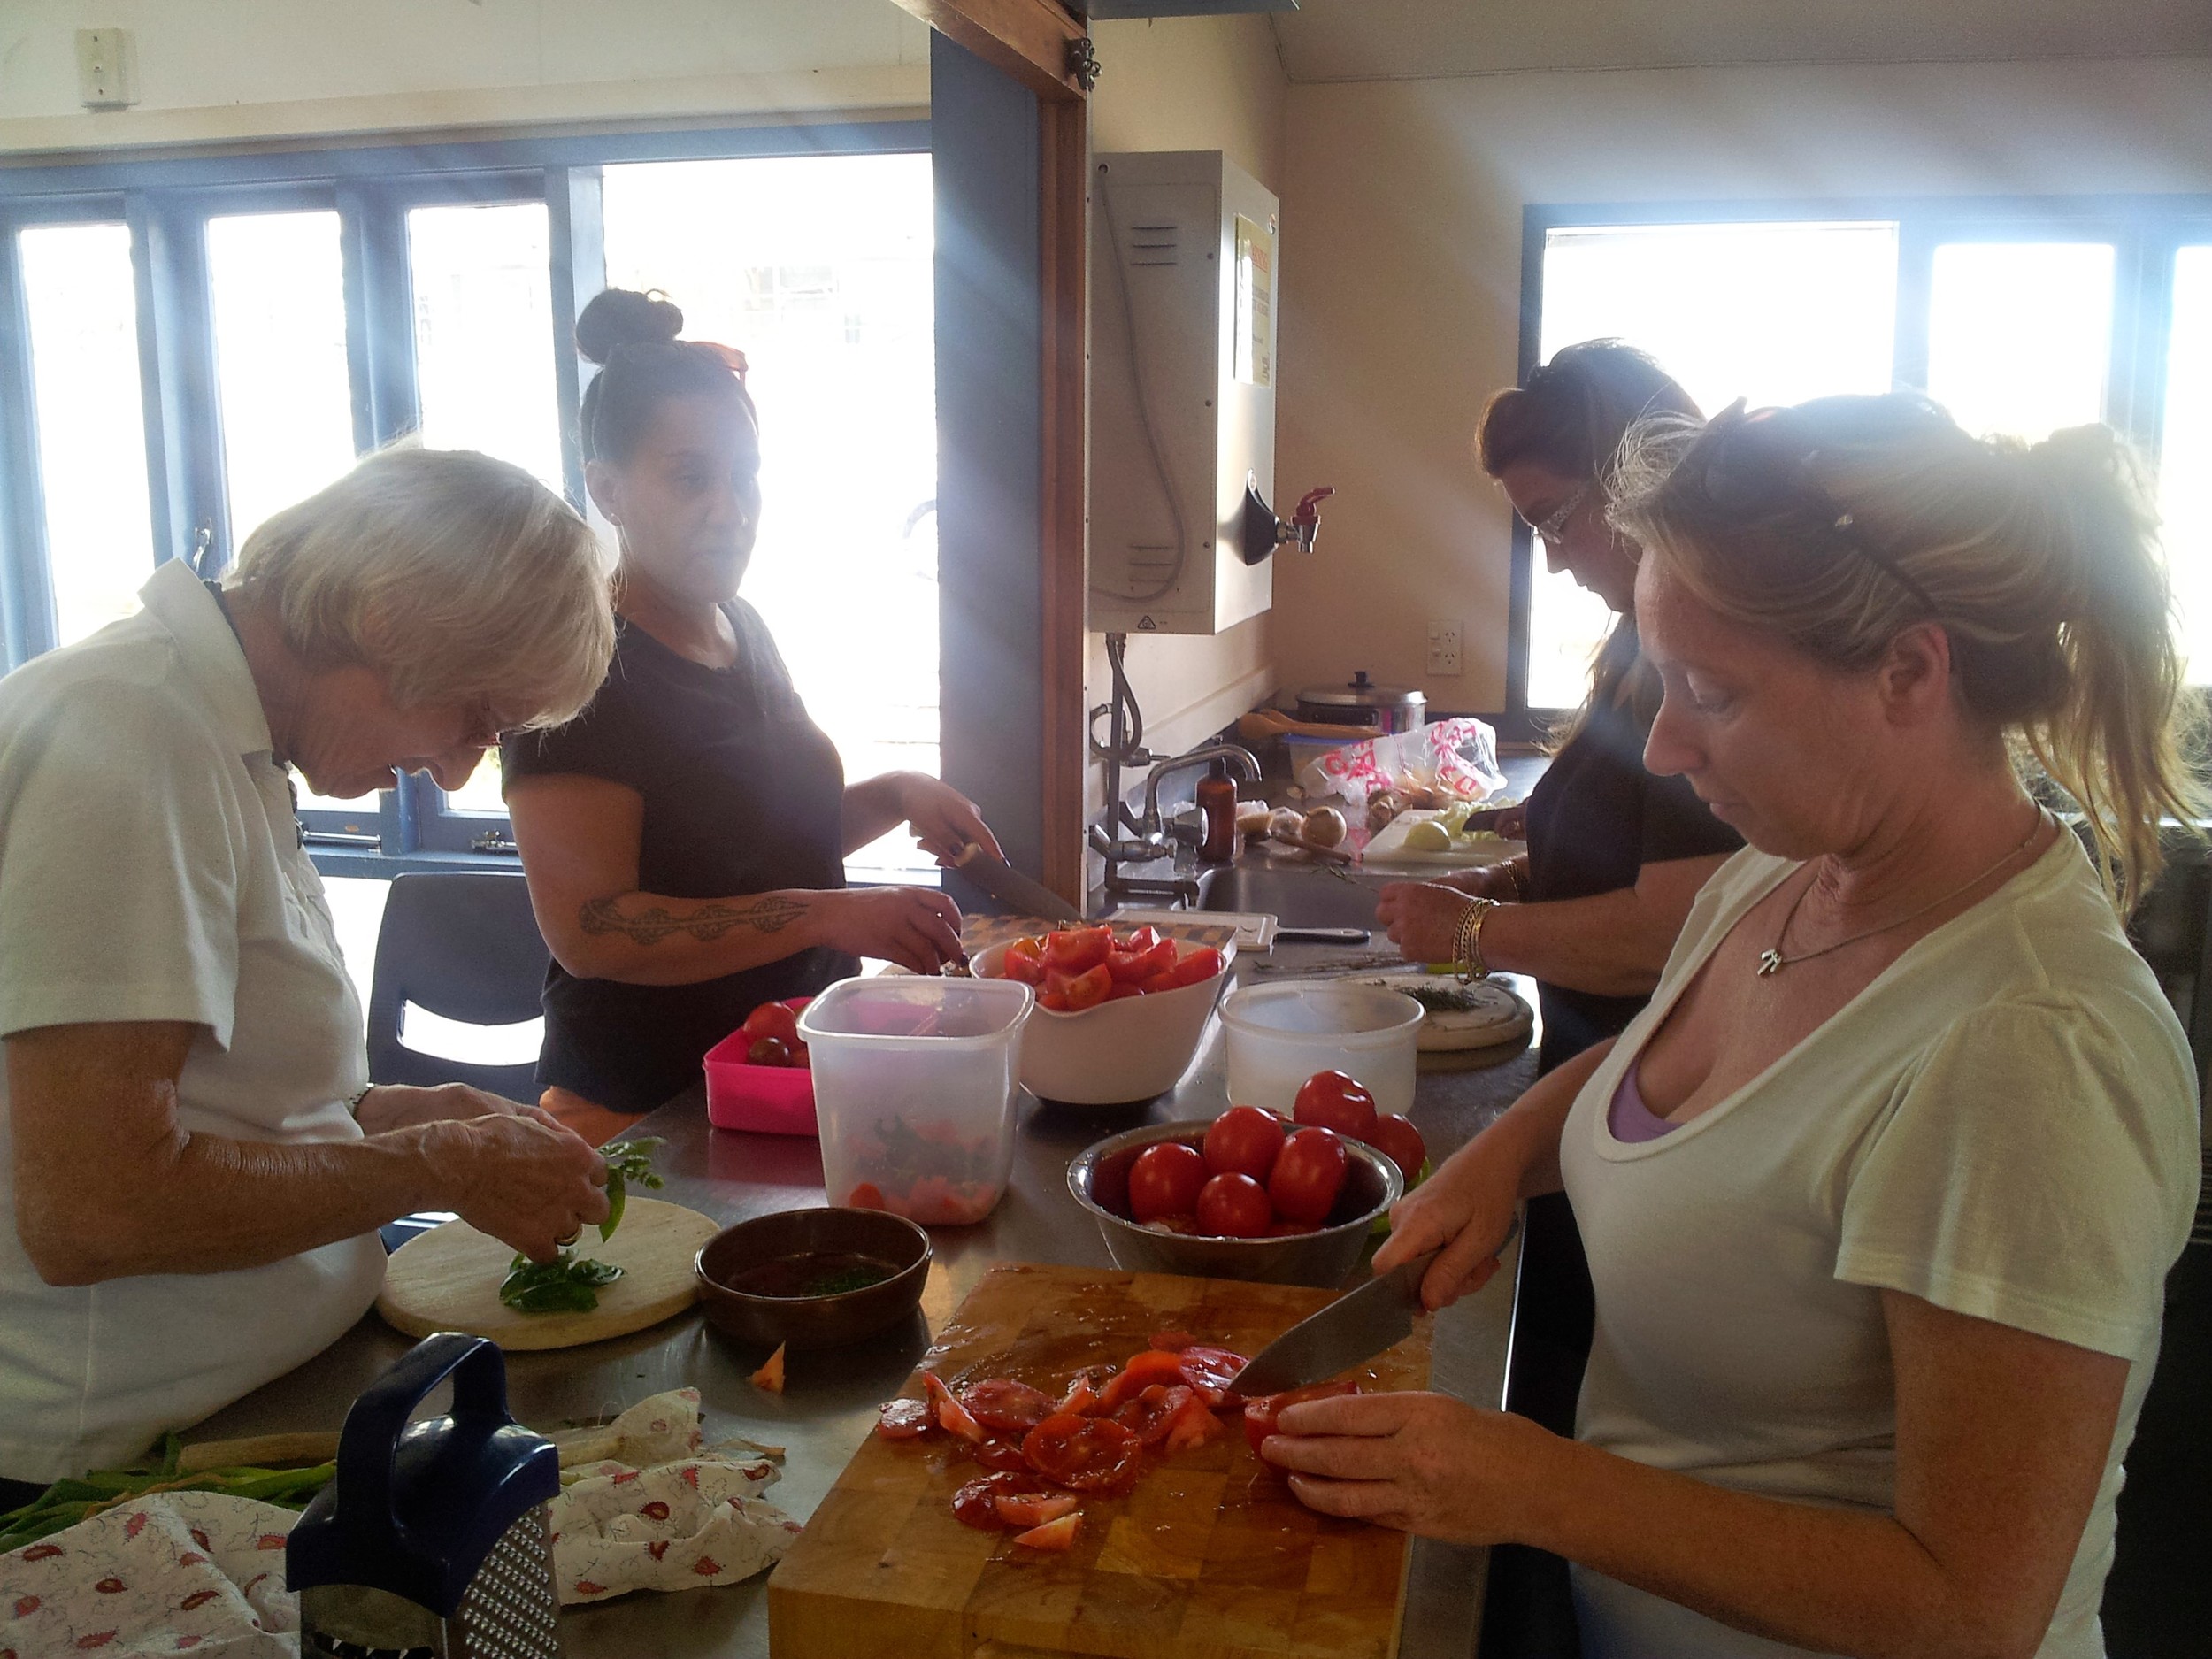  'Preserving the Summer Harvest' workshop. Chopping up fresh, local tomatoes, herbs, onions and garlic while sharing knowledge. 